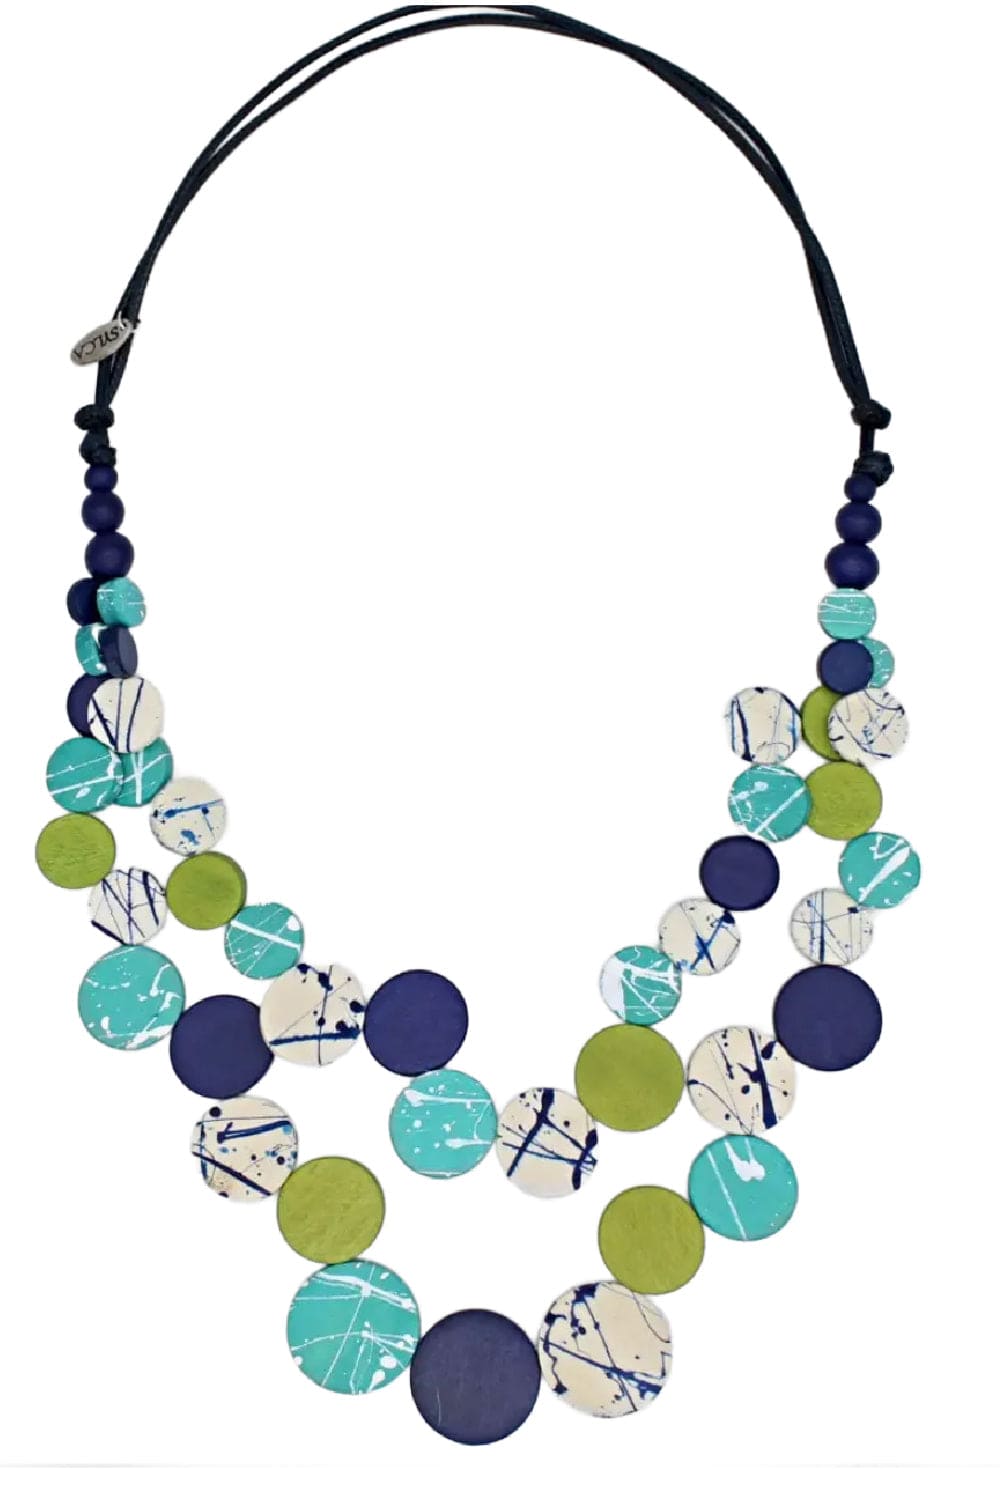 Funky statement necklace with spatter paint design.